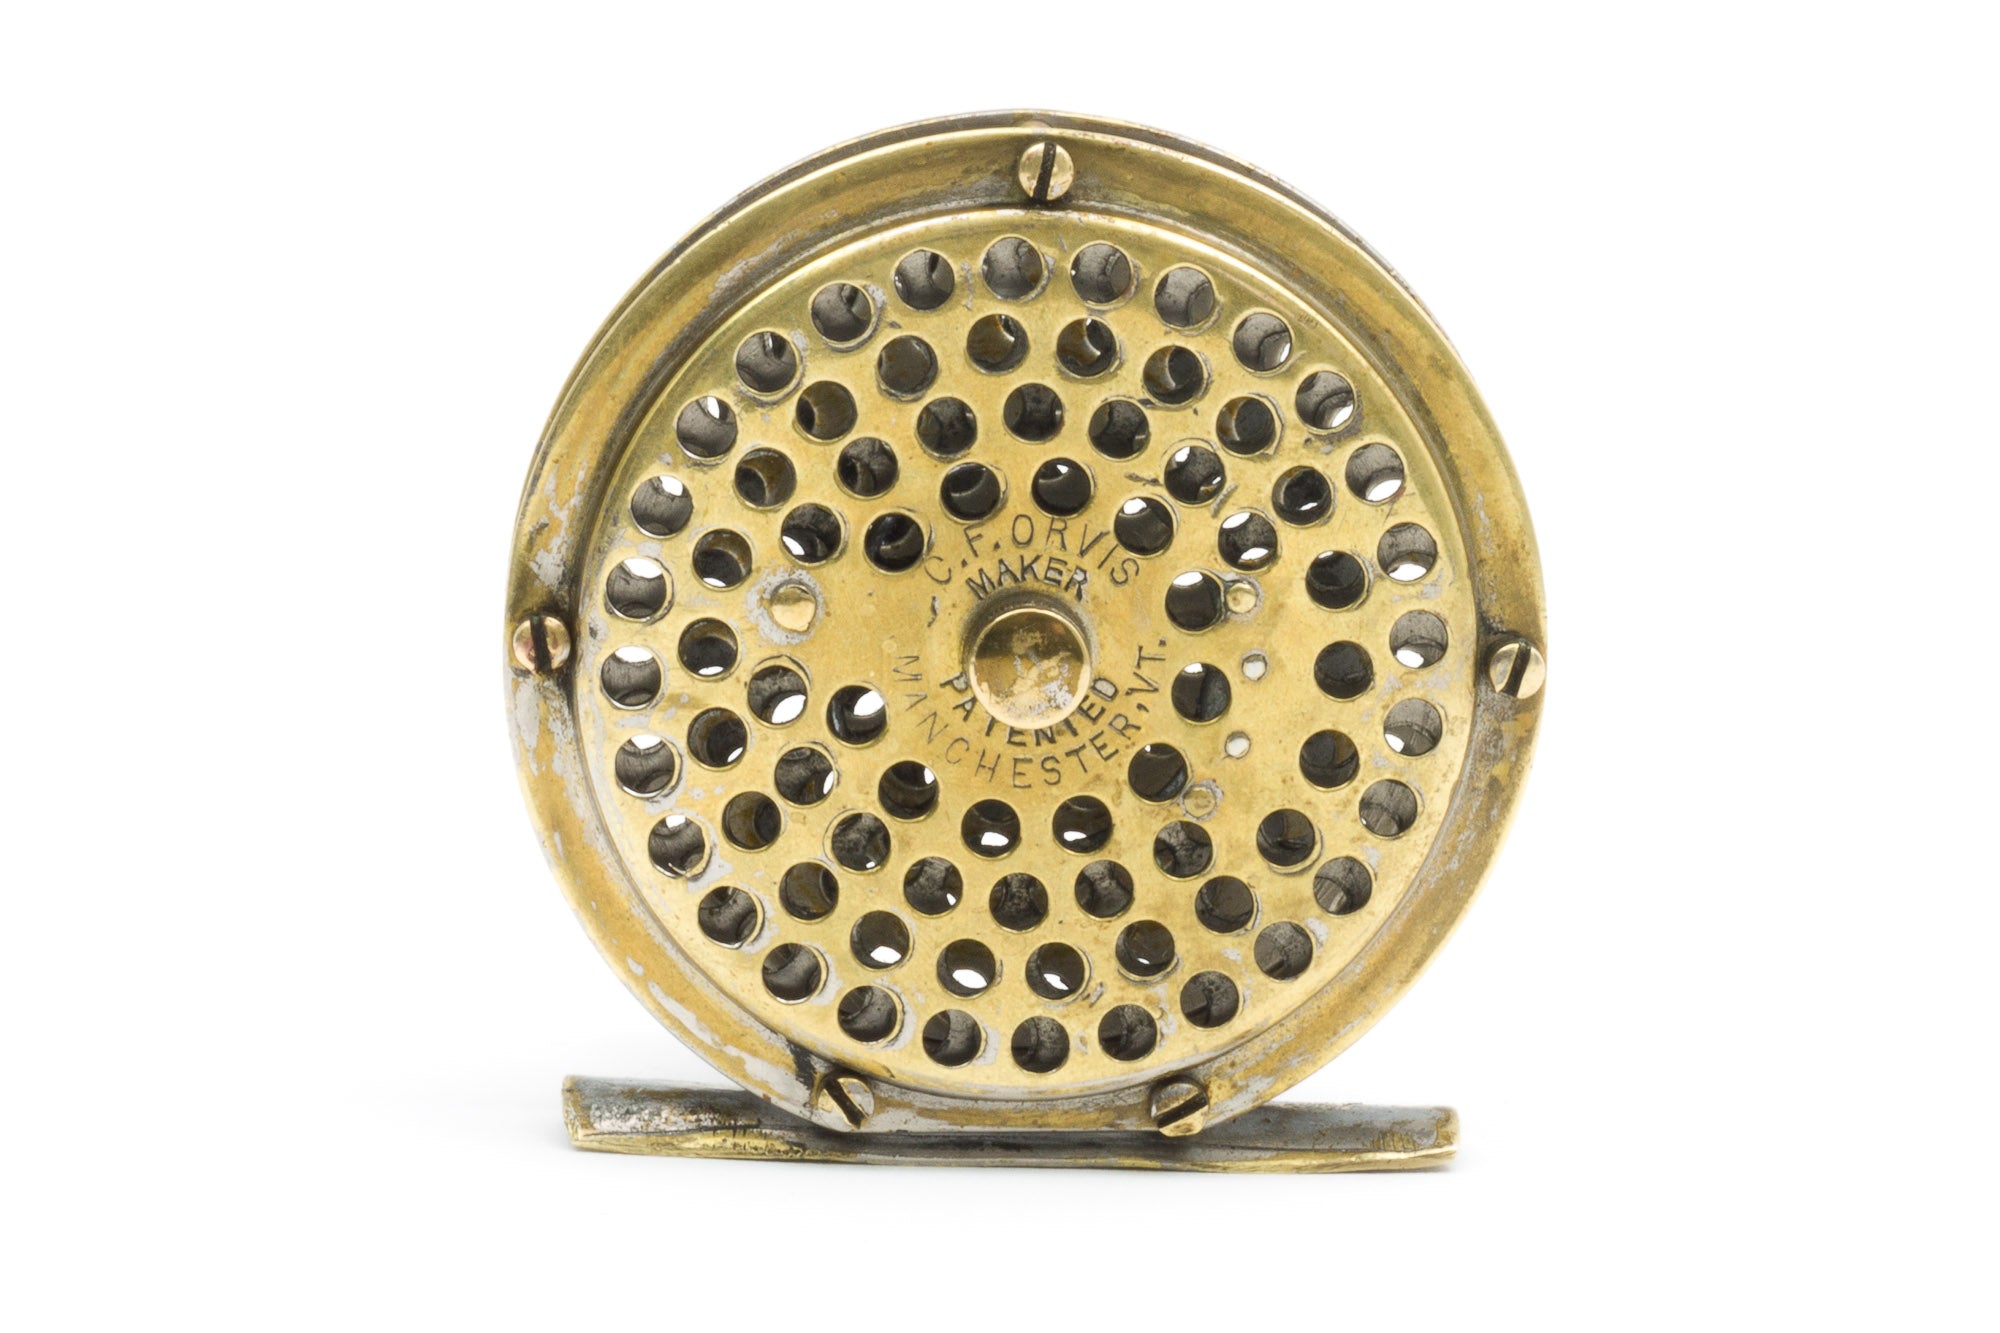 Orvis 7-8 Weight Fly Fishing Reels for sale